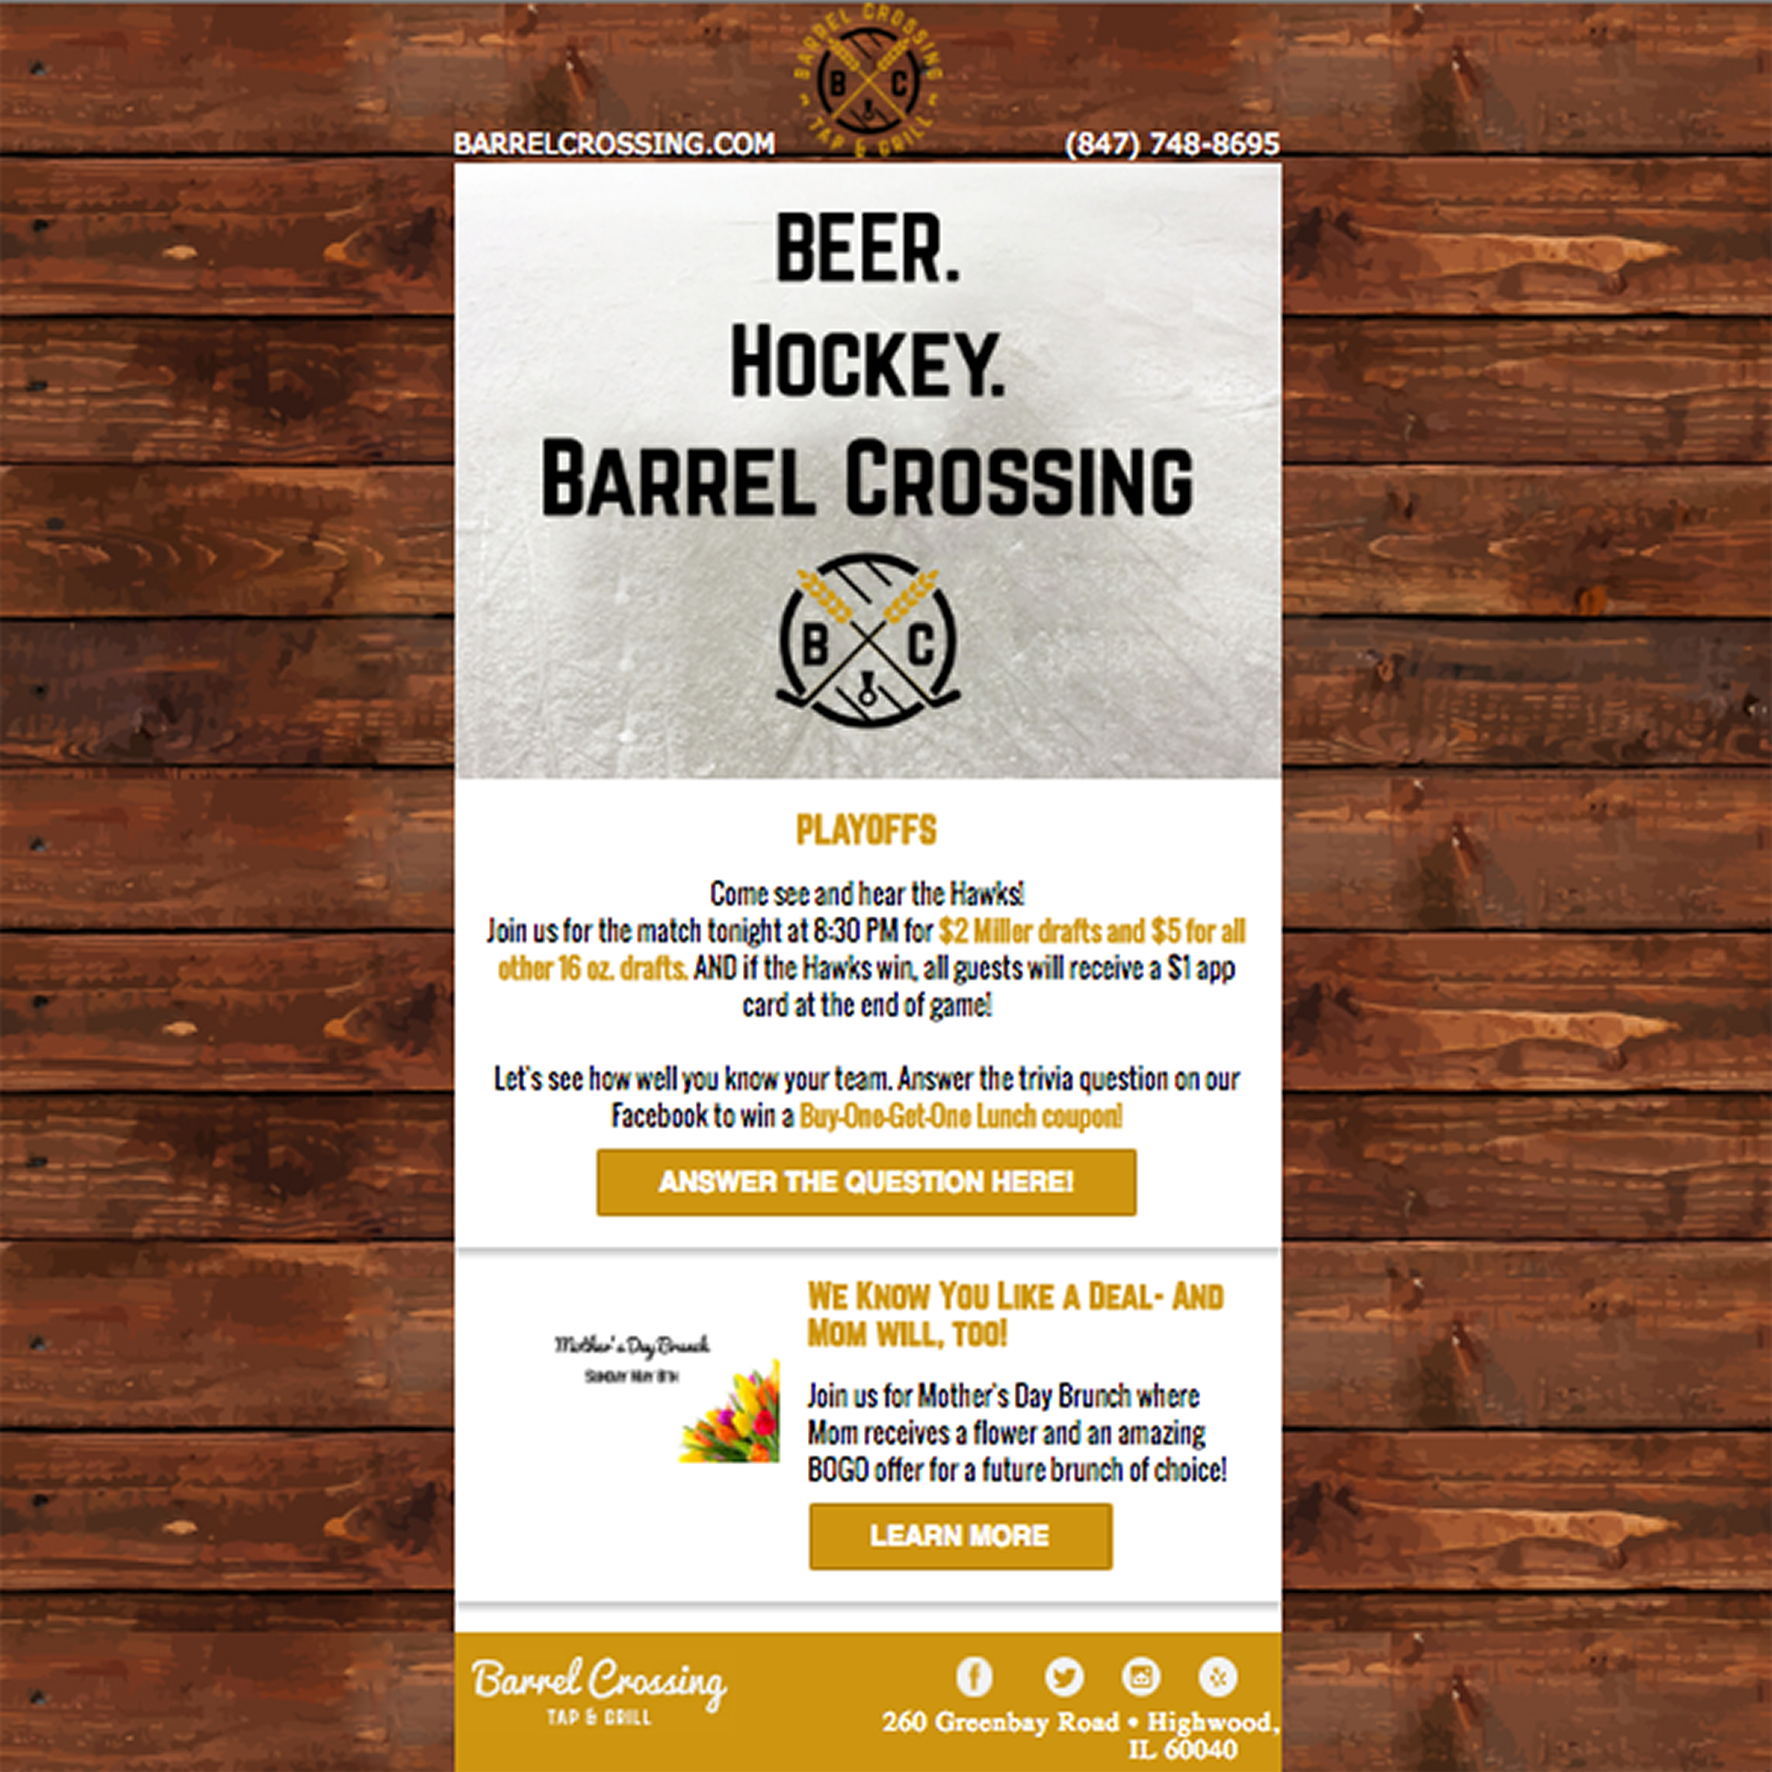 Barrel Crossing Email Campaign